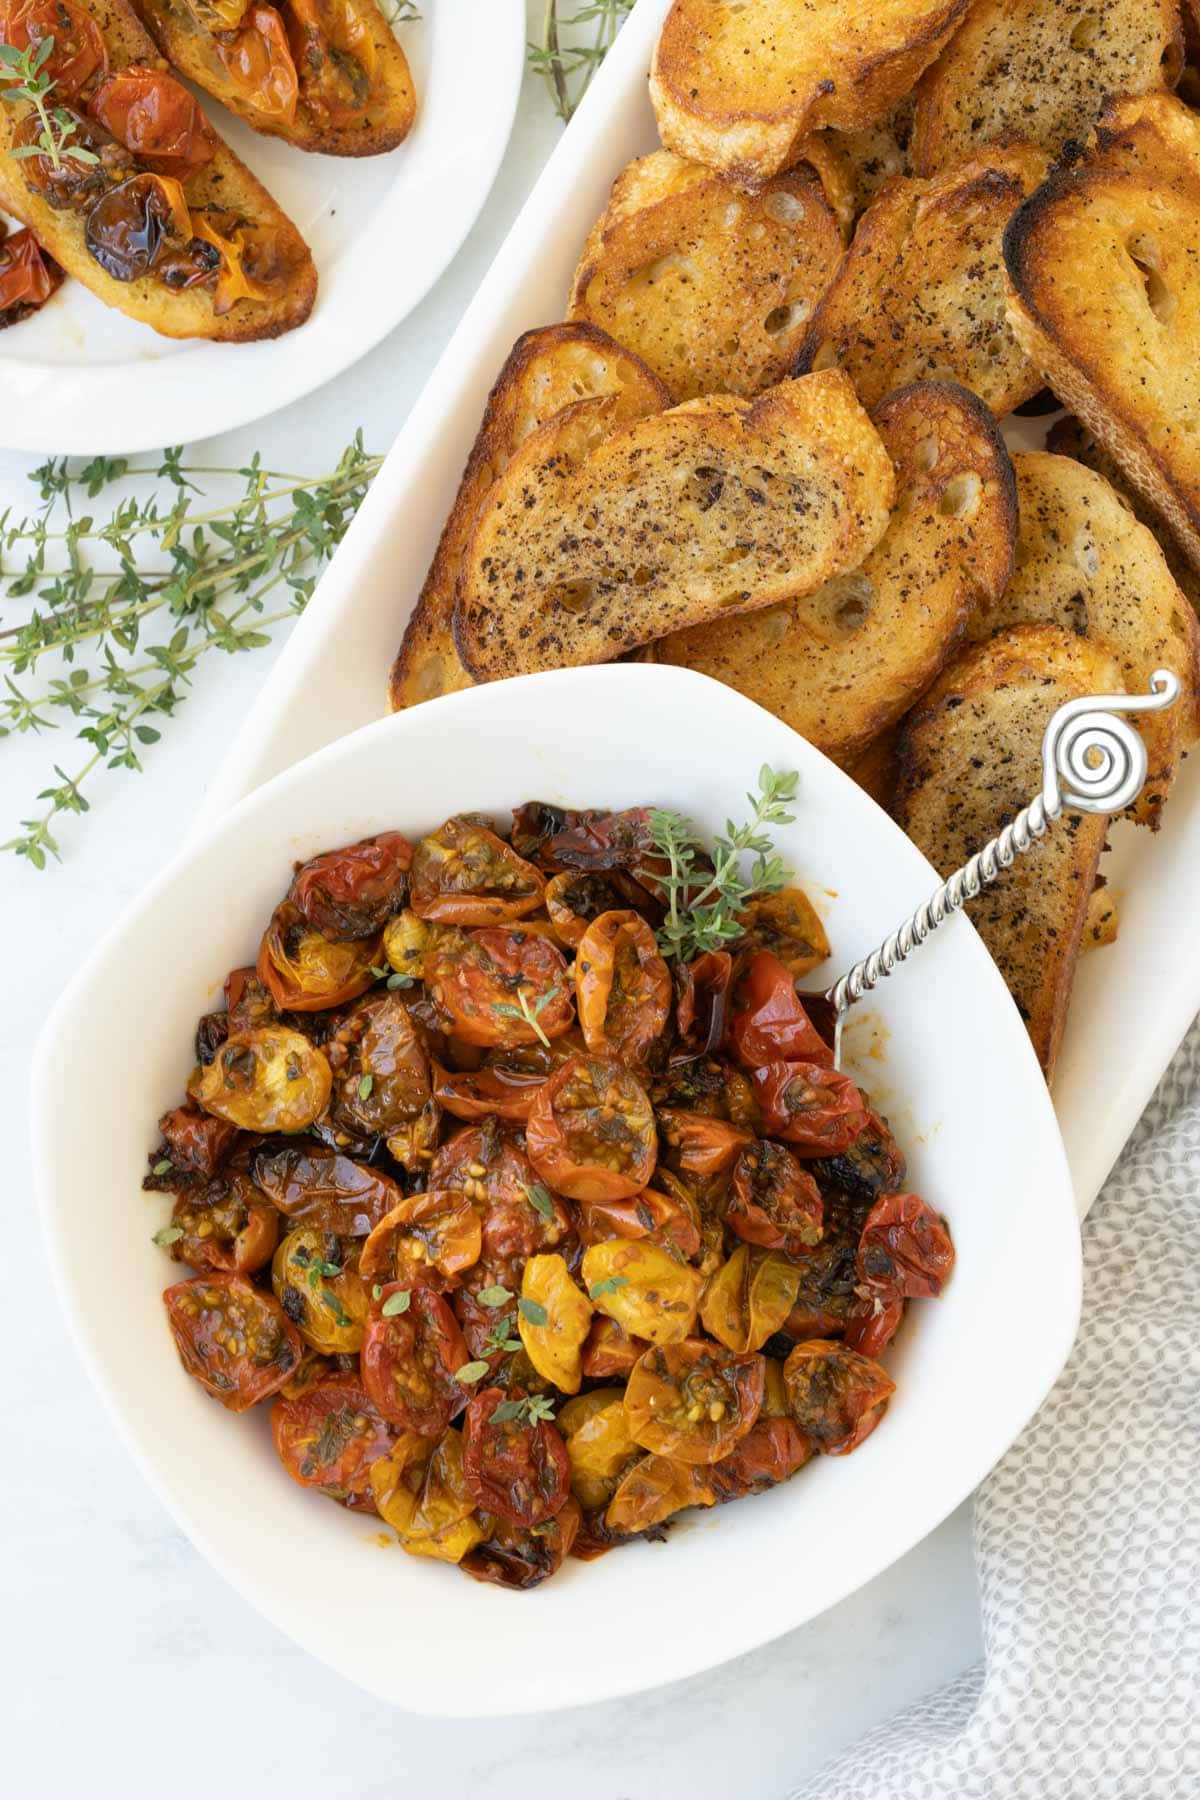 A bowl of colorful oven roasted tomatoes with thyme leaves and golden crostini.